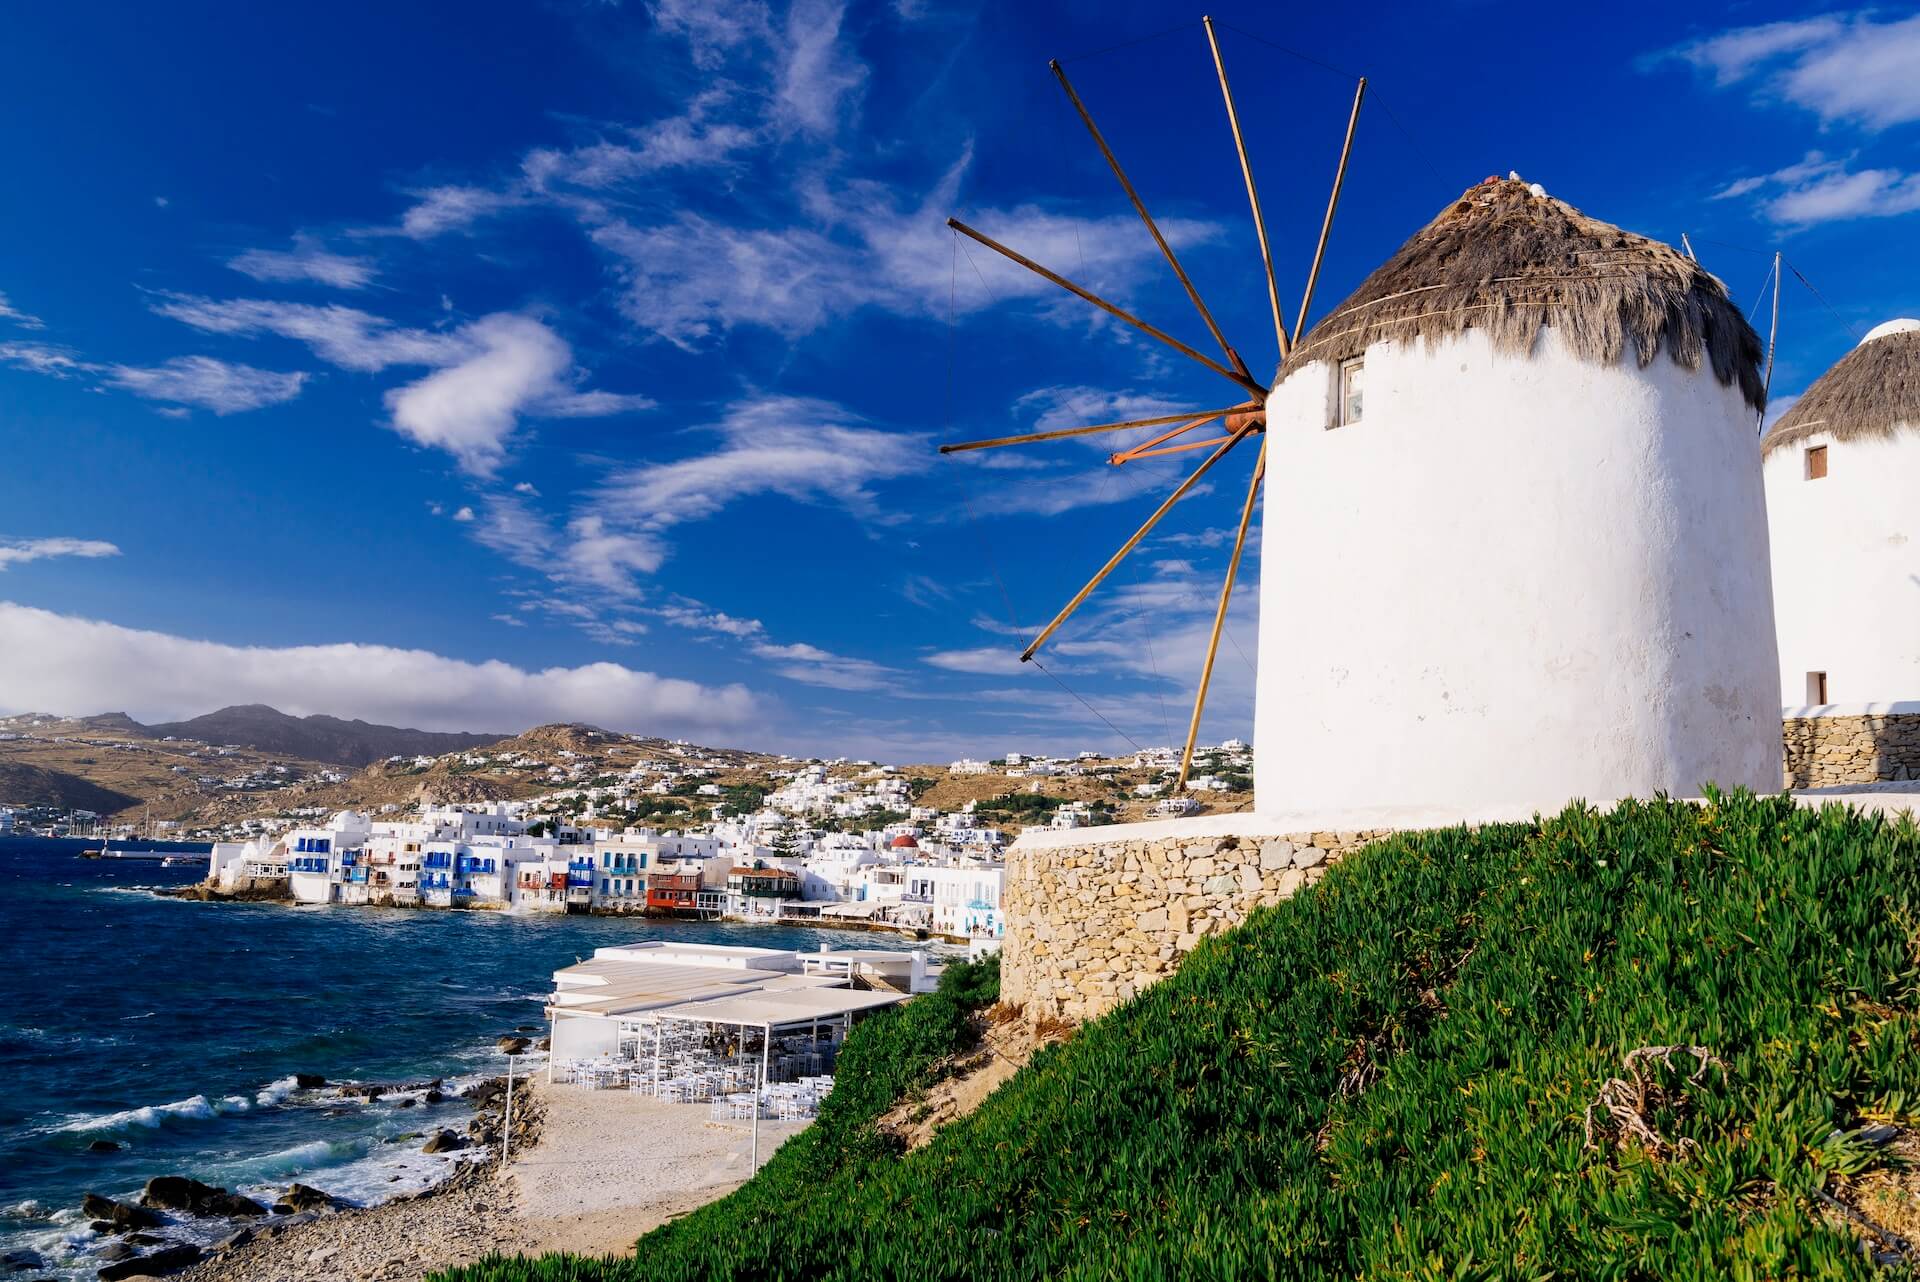 Windmill on the right and Mykonos town on the left